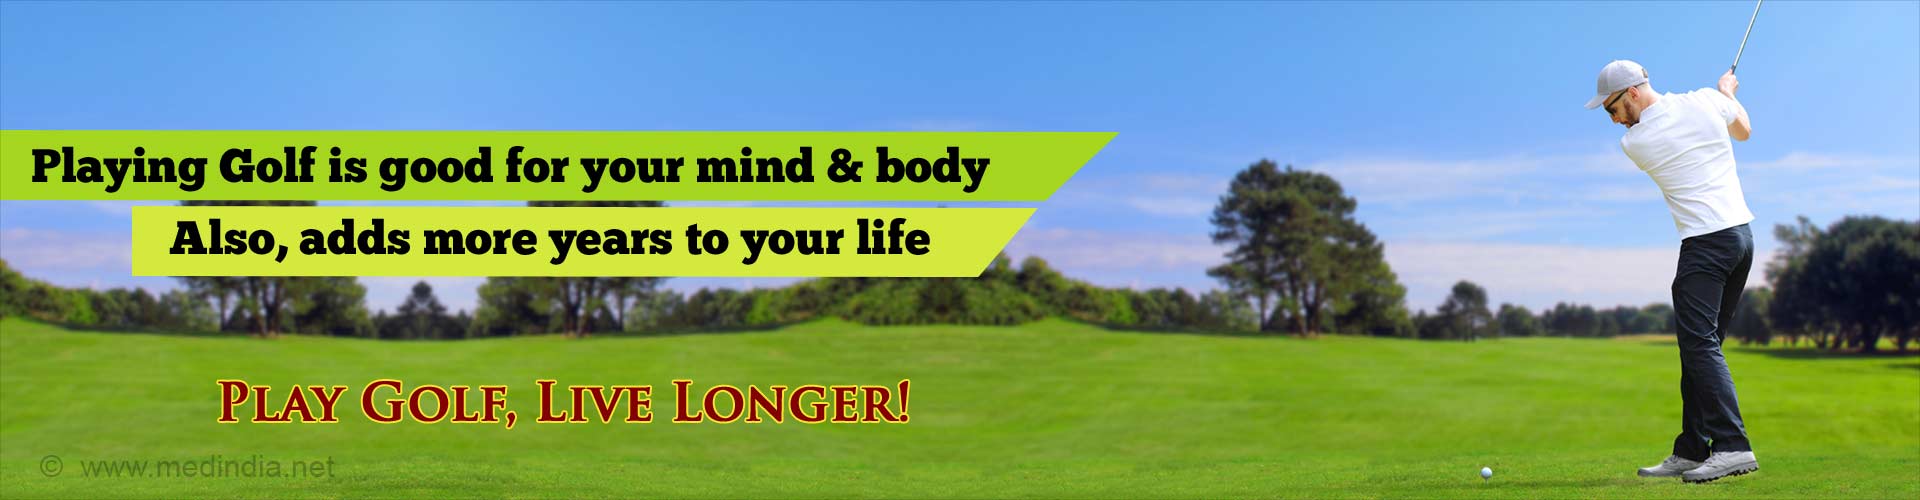 Playing golf is good for your mind and body. Also, adds more years to your life. Play golf, live longer.